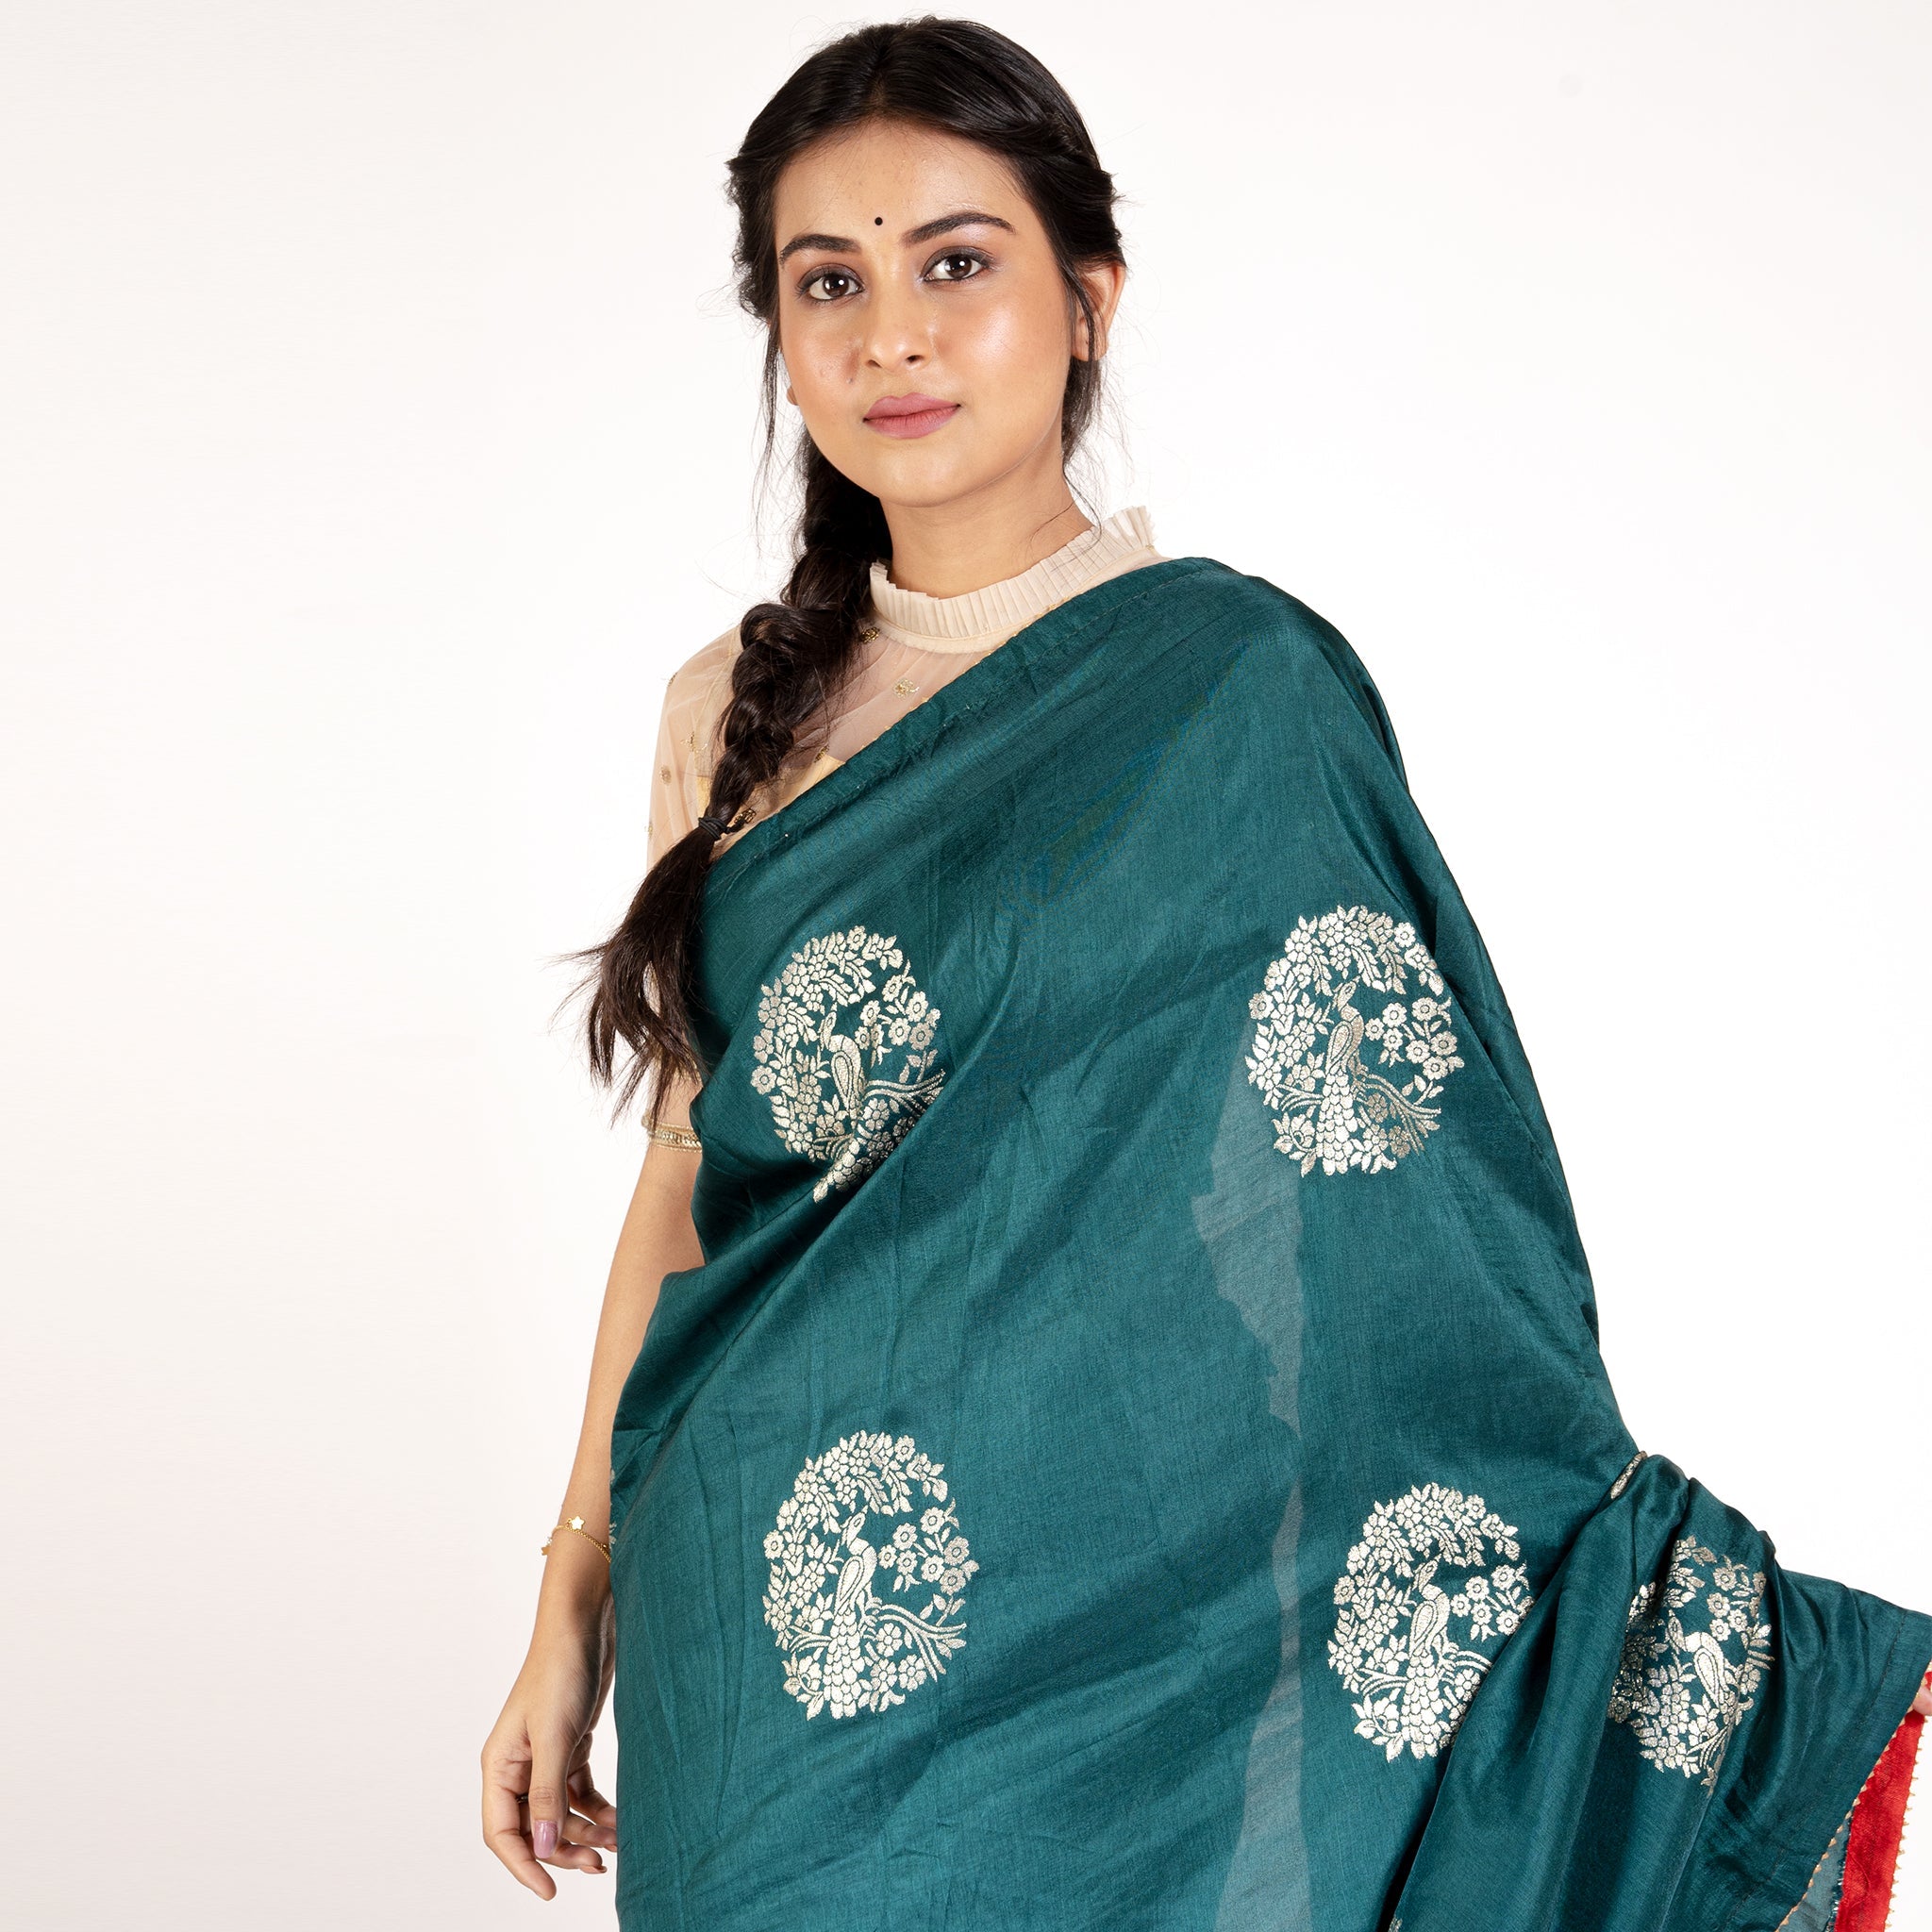 Women's Teal Dola Silk Saree With Woven Vriksh Zari Motifs And Contrasting Backing Border - Boveee